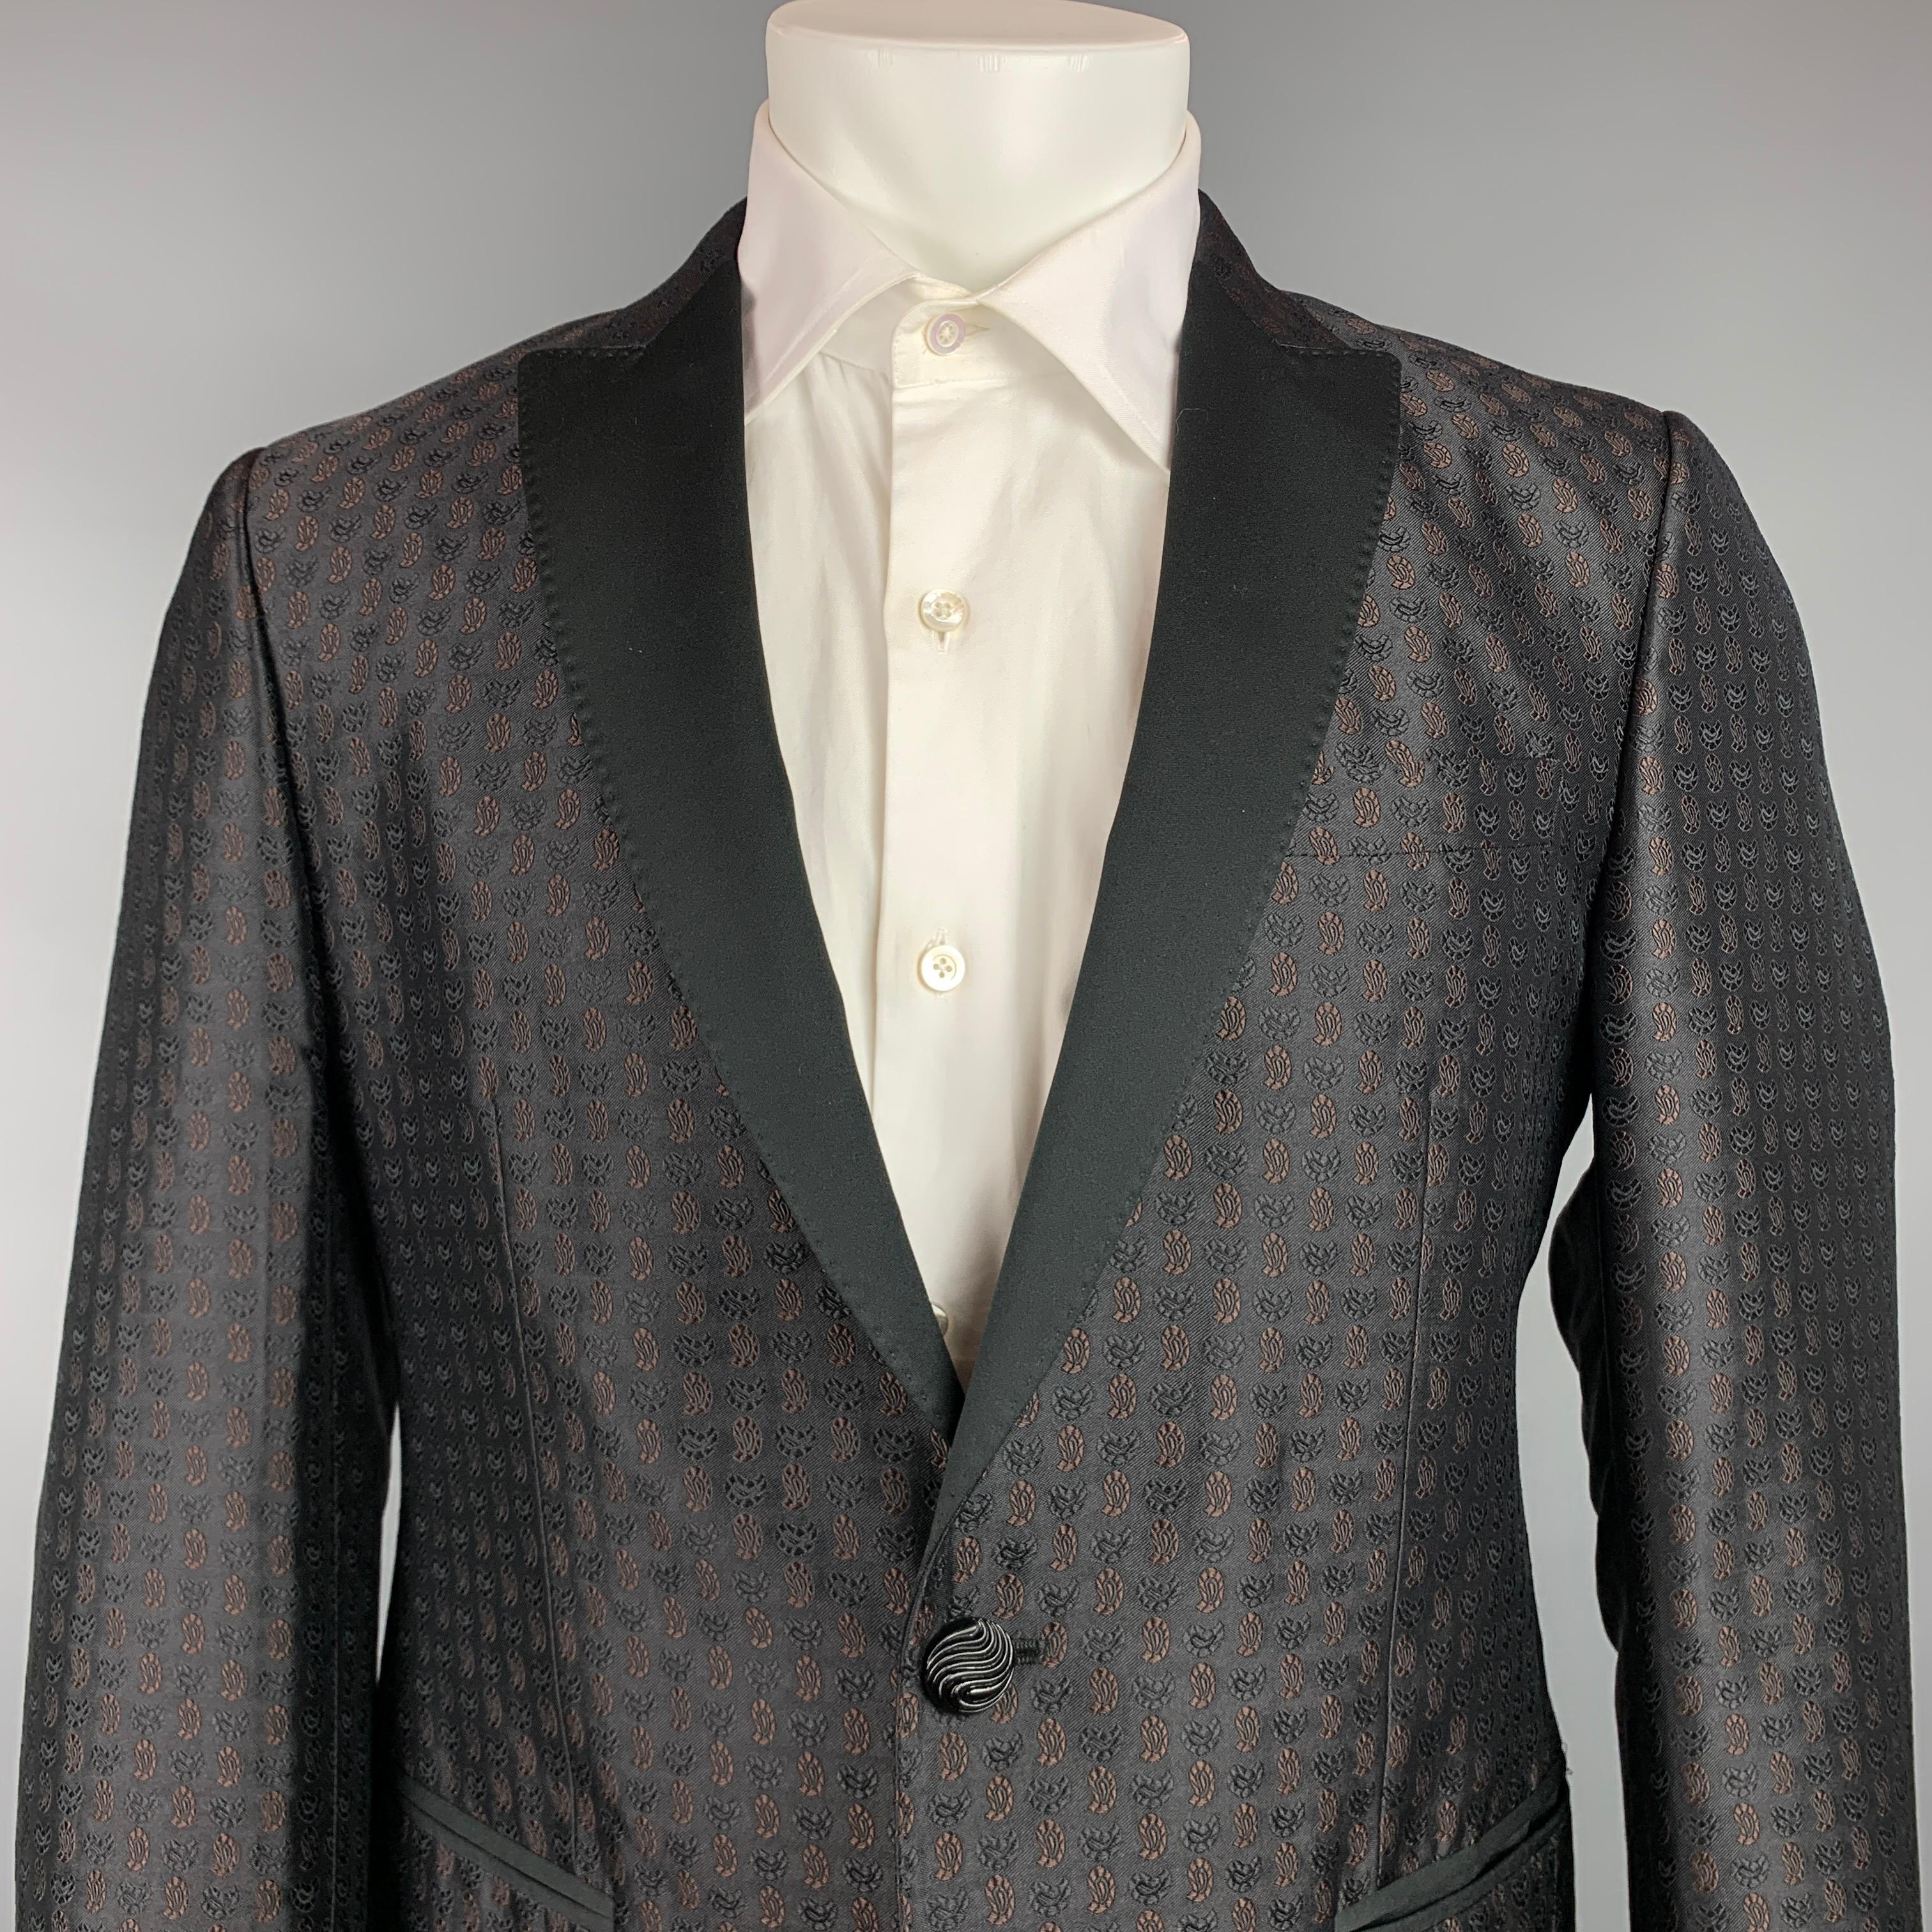 ETRO sport coat comes in a black & brown jacquard silk blend with a full liner featuring a peak lapel, slit pockets, and a single button closure. Made in Italy.

Very Good Pre-Owned Condition.
Marked: 48

Measurements:

Shoulder: 17.5 in.
Chest: 38